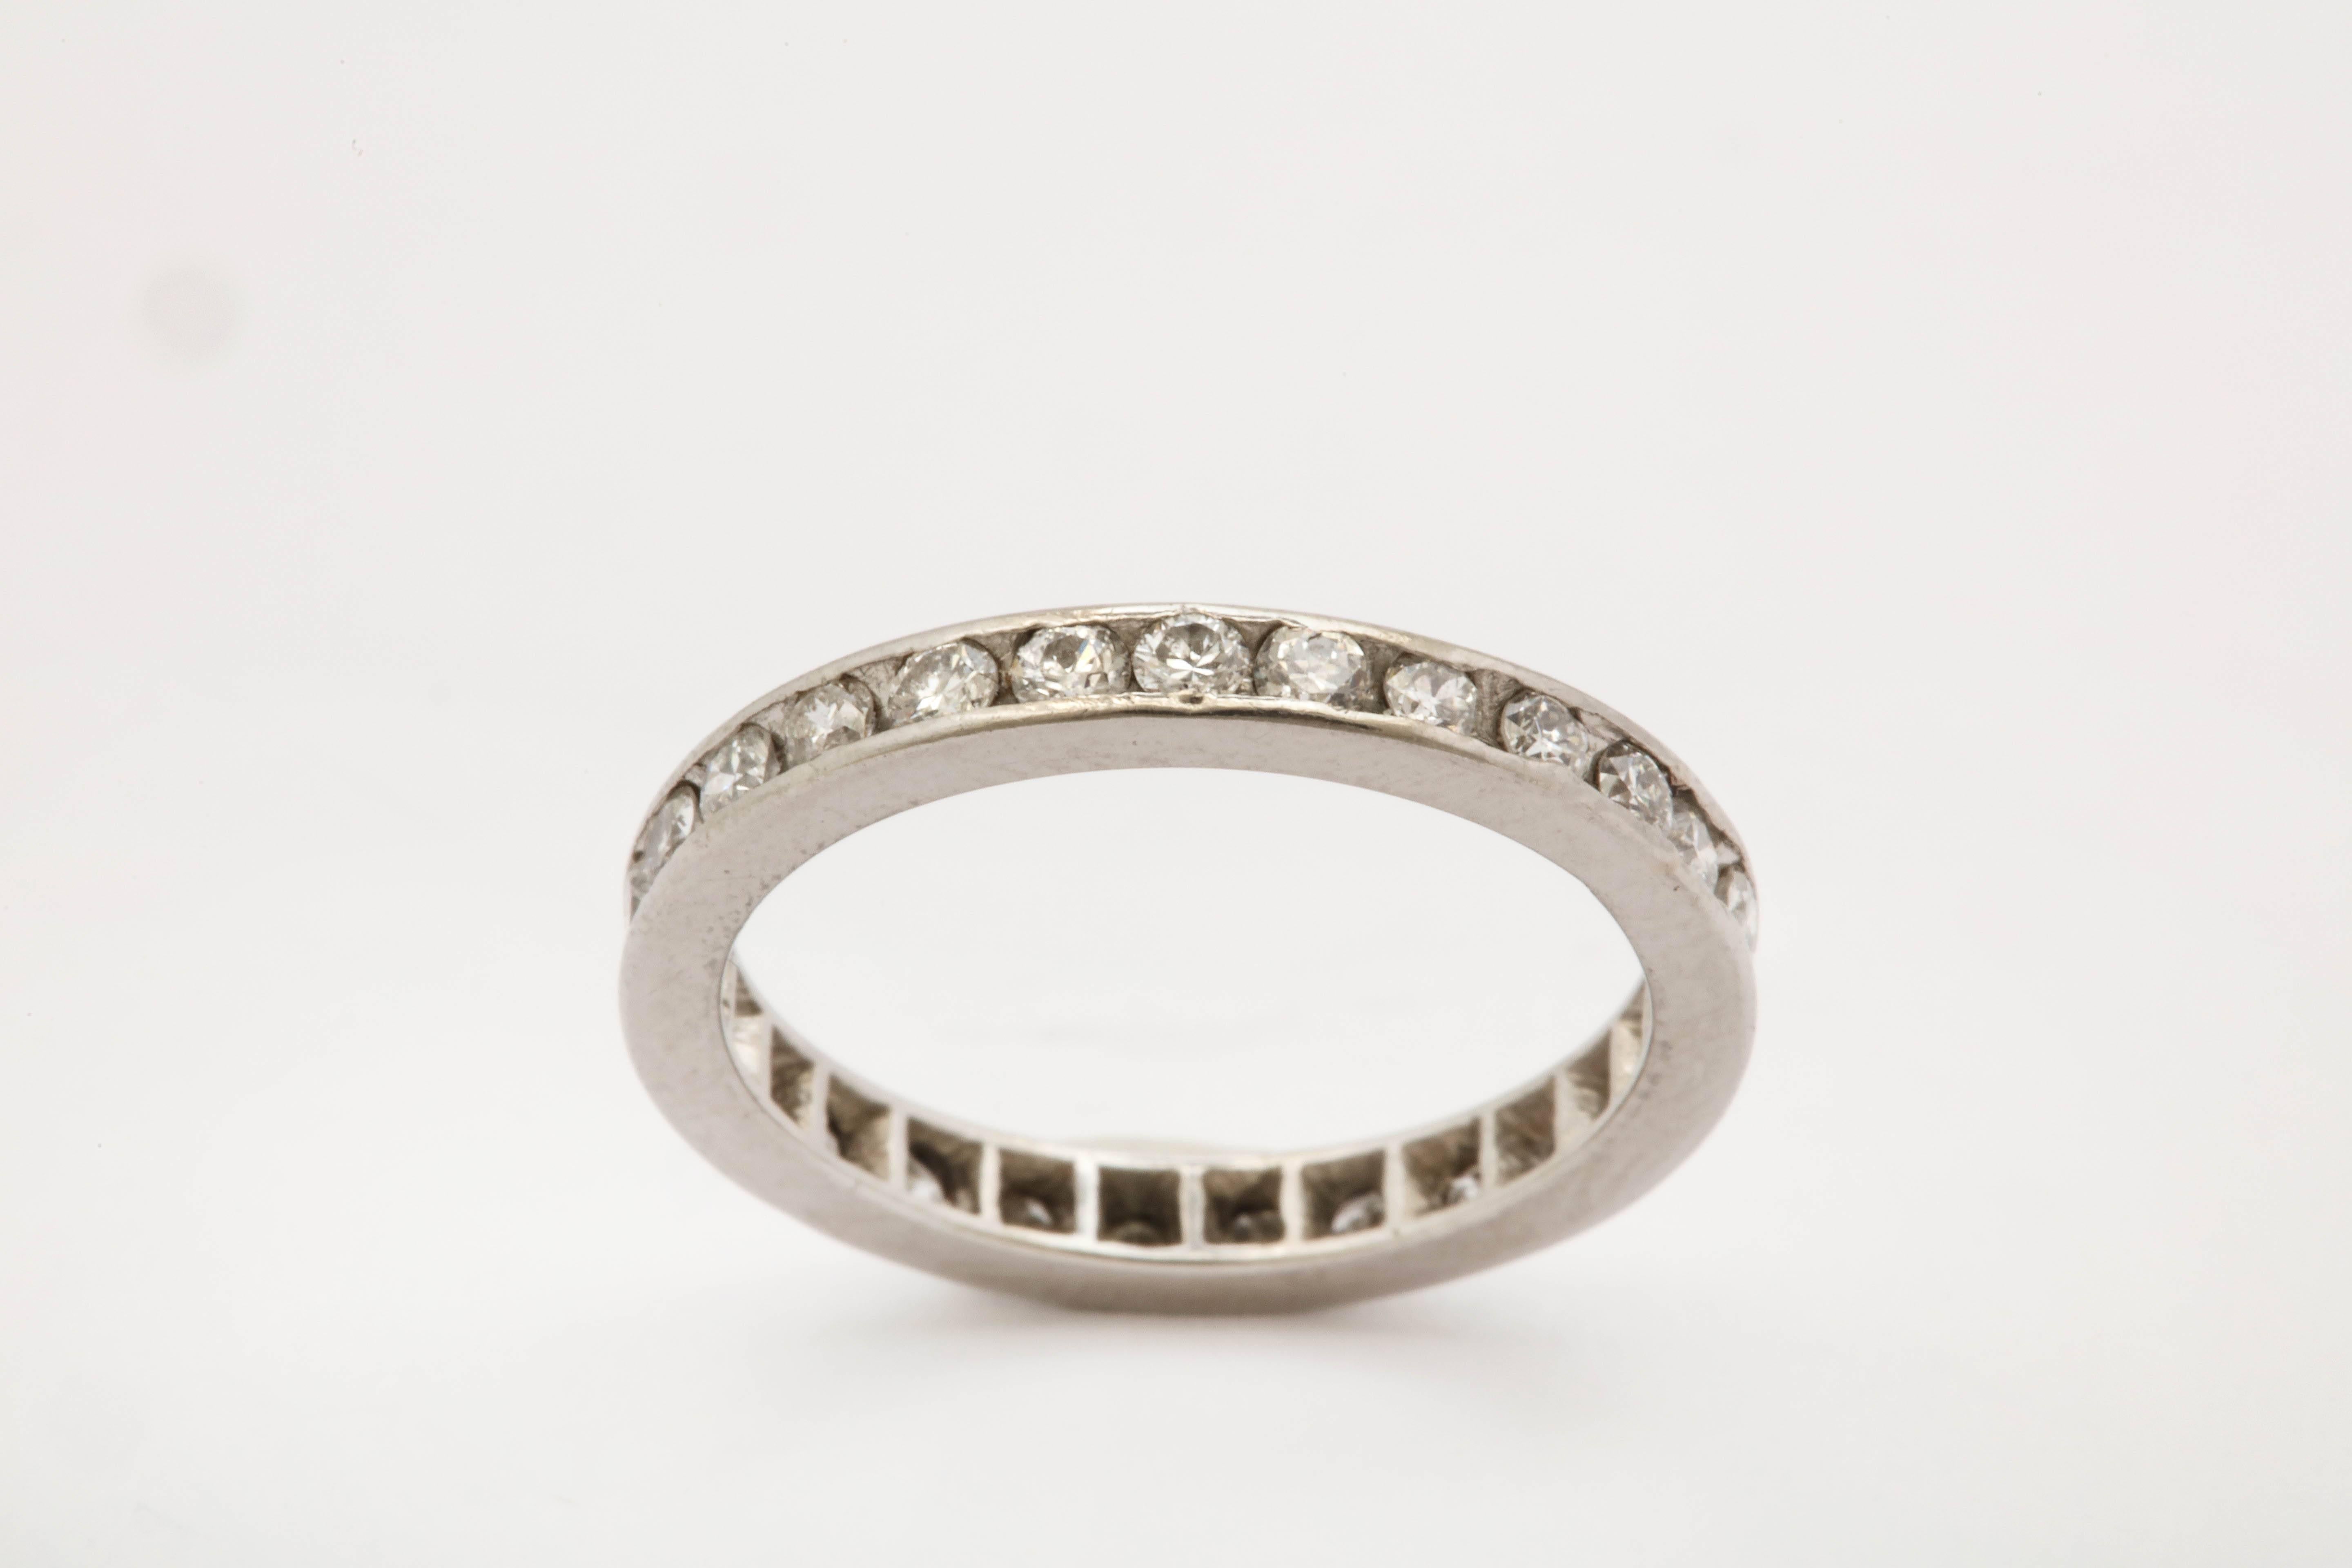 One Ladies Platinum Eternity Band Composed Of 29 Full Cut Diamonds Weighing Approximately .75cts Total Weight. Diamonds Are All Channel Set And Ring Size Is An American 5.5 . Designed In The 1940's In The United States.Width Is Approximately 2.5 MM.